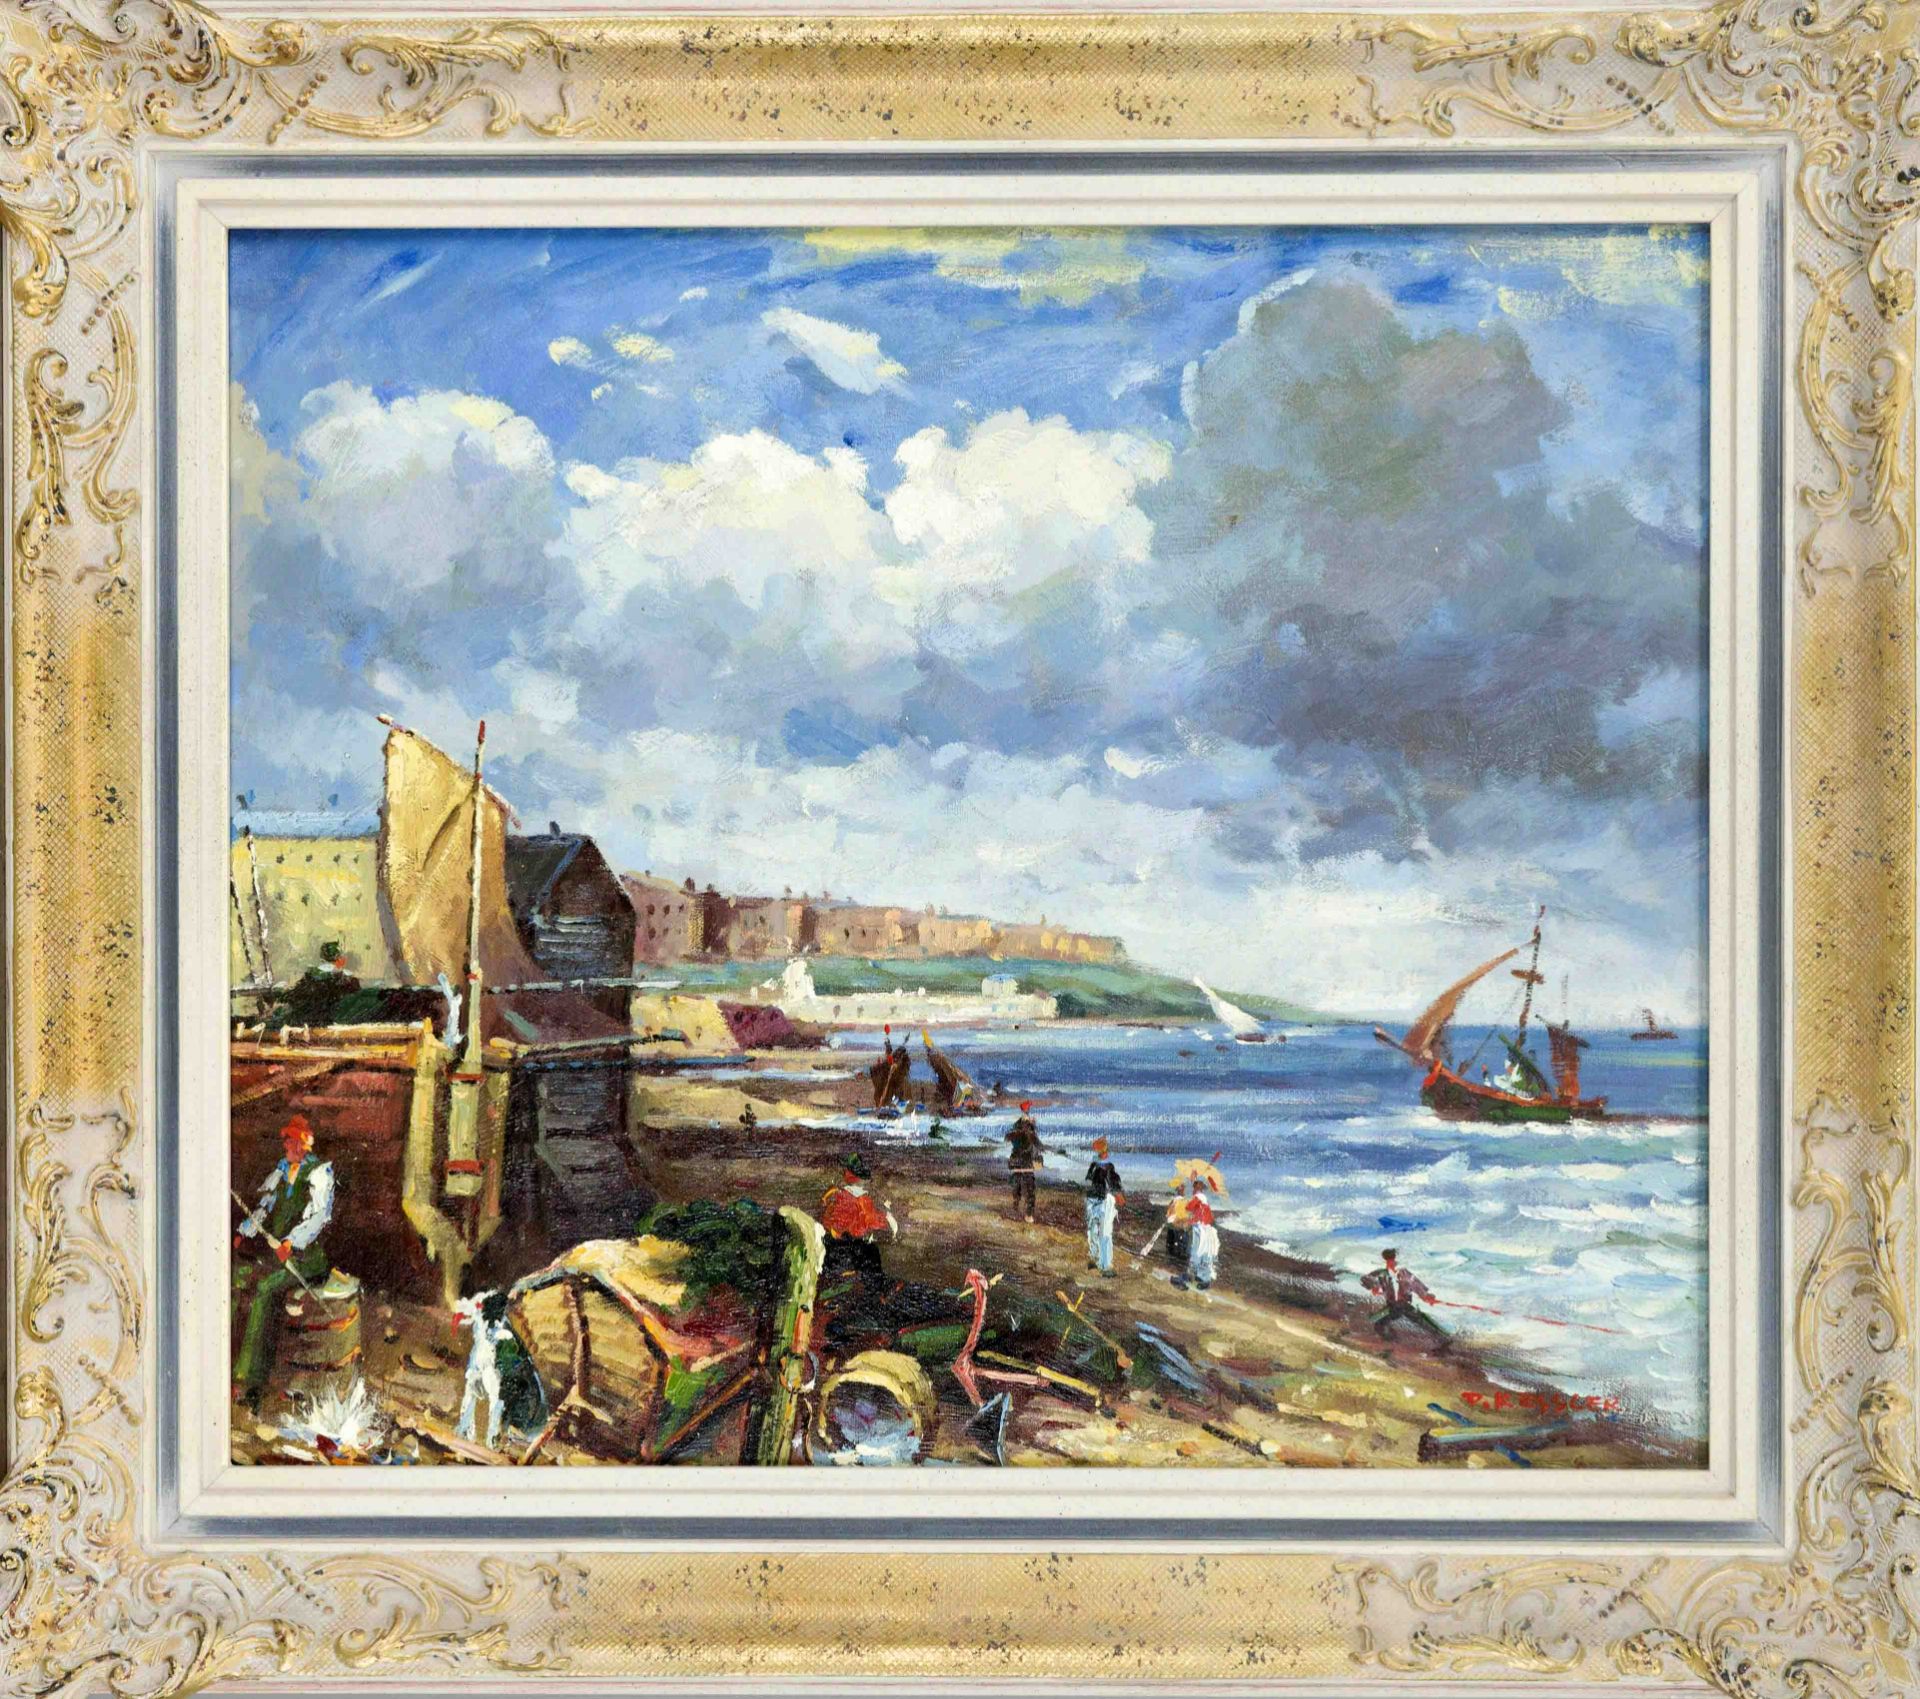 D. Kessler, late 20th century, Coastal scene with staffage figures in the style of the turn of the